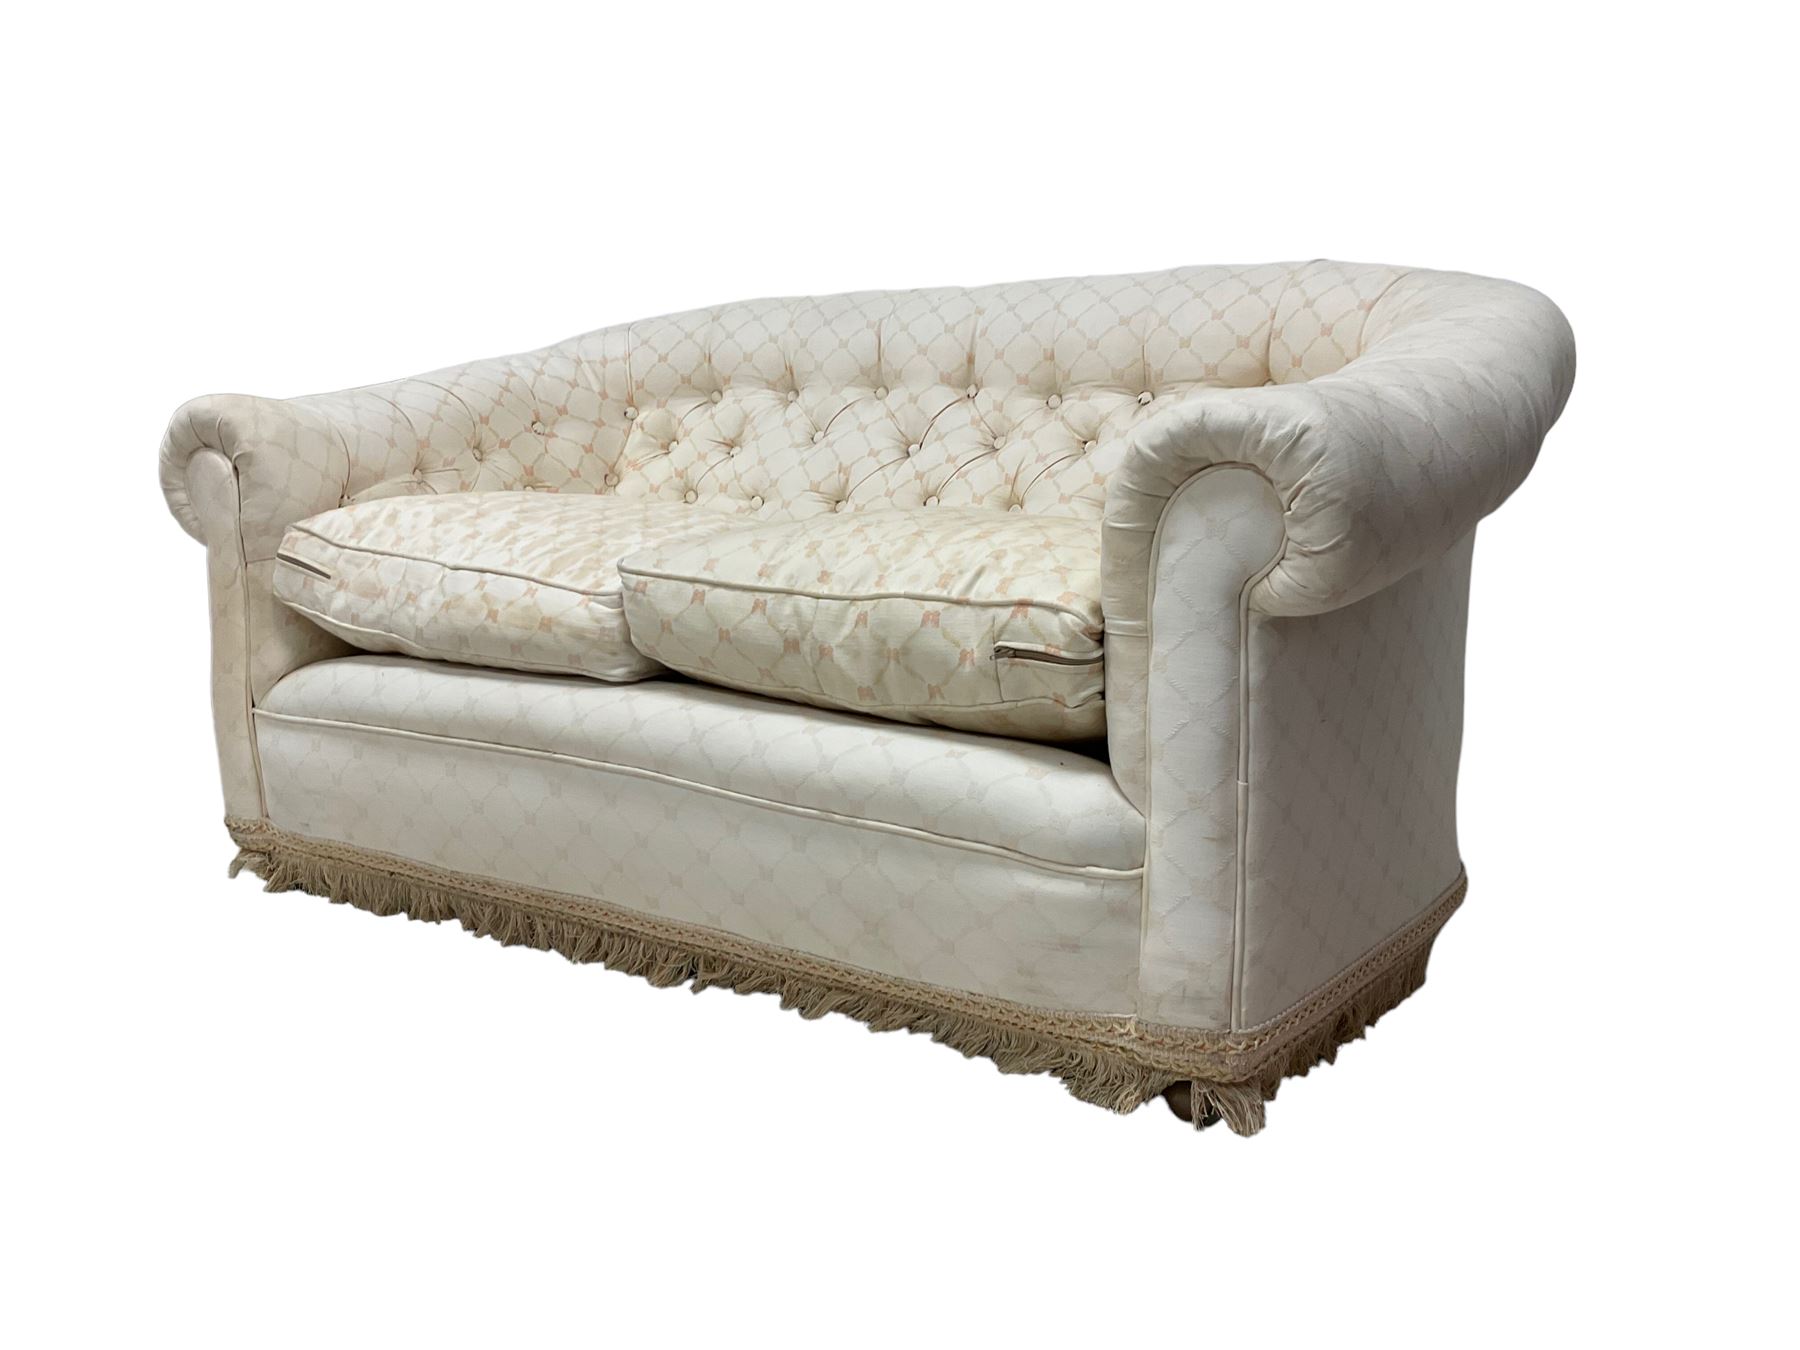 Pair chesterfield design two seat sofas - Image 7 of 8